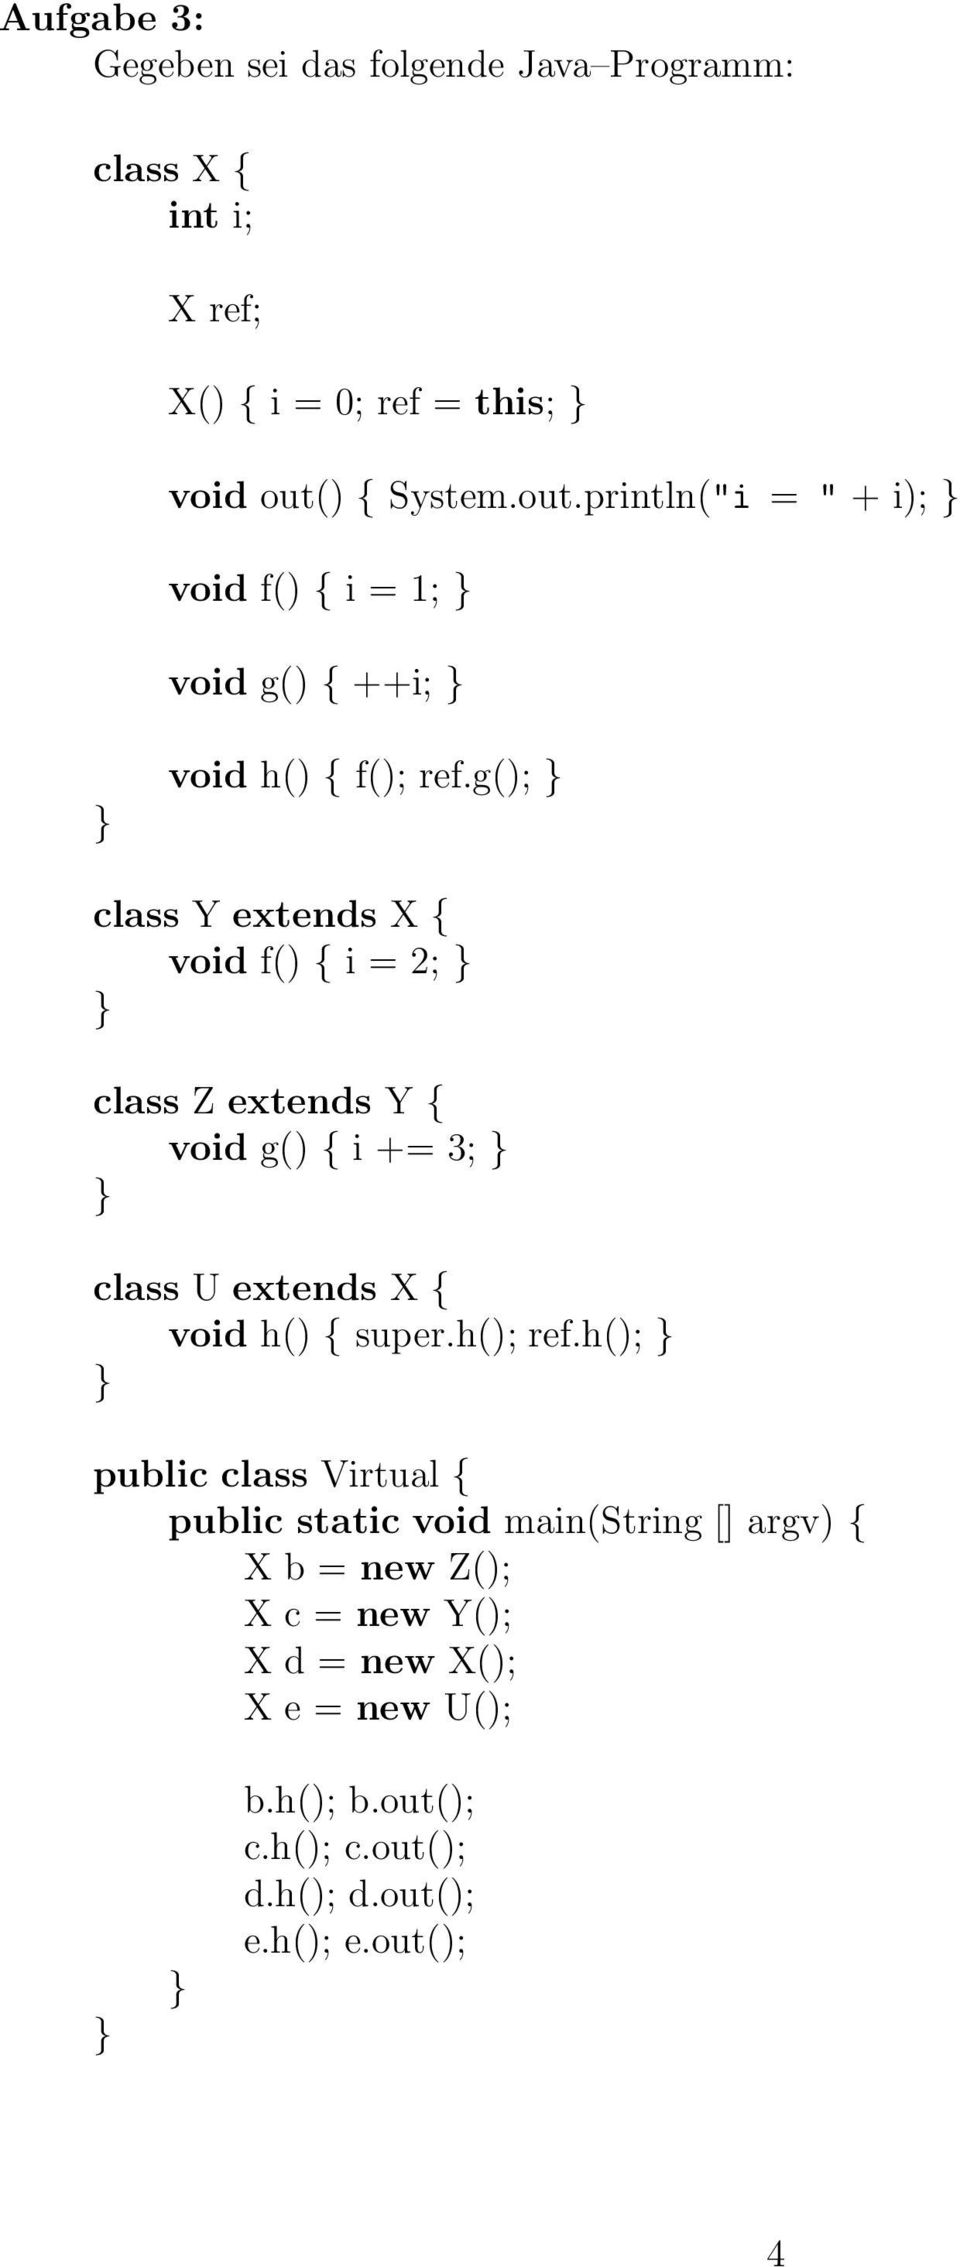 g(); class Y extends X { void f() { i = 2; class Z extends Y { void g() { i += 3; class U extends X { void h() { super.h(); ref.